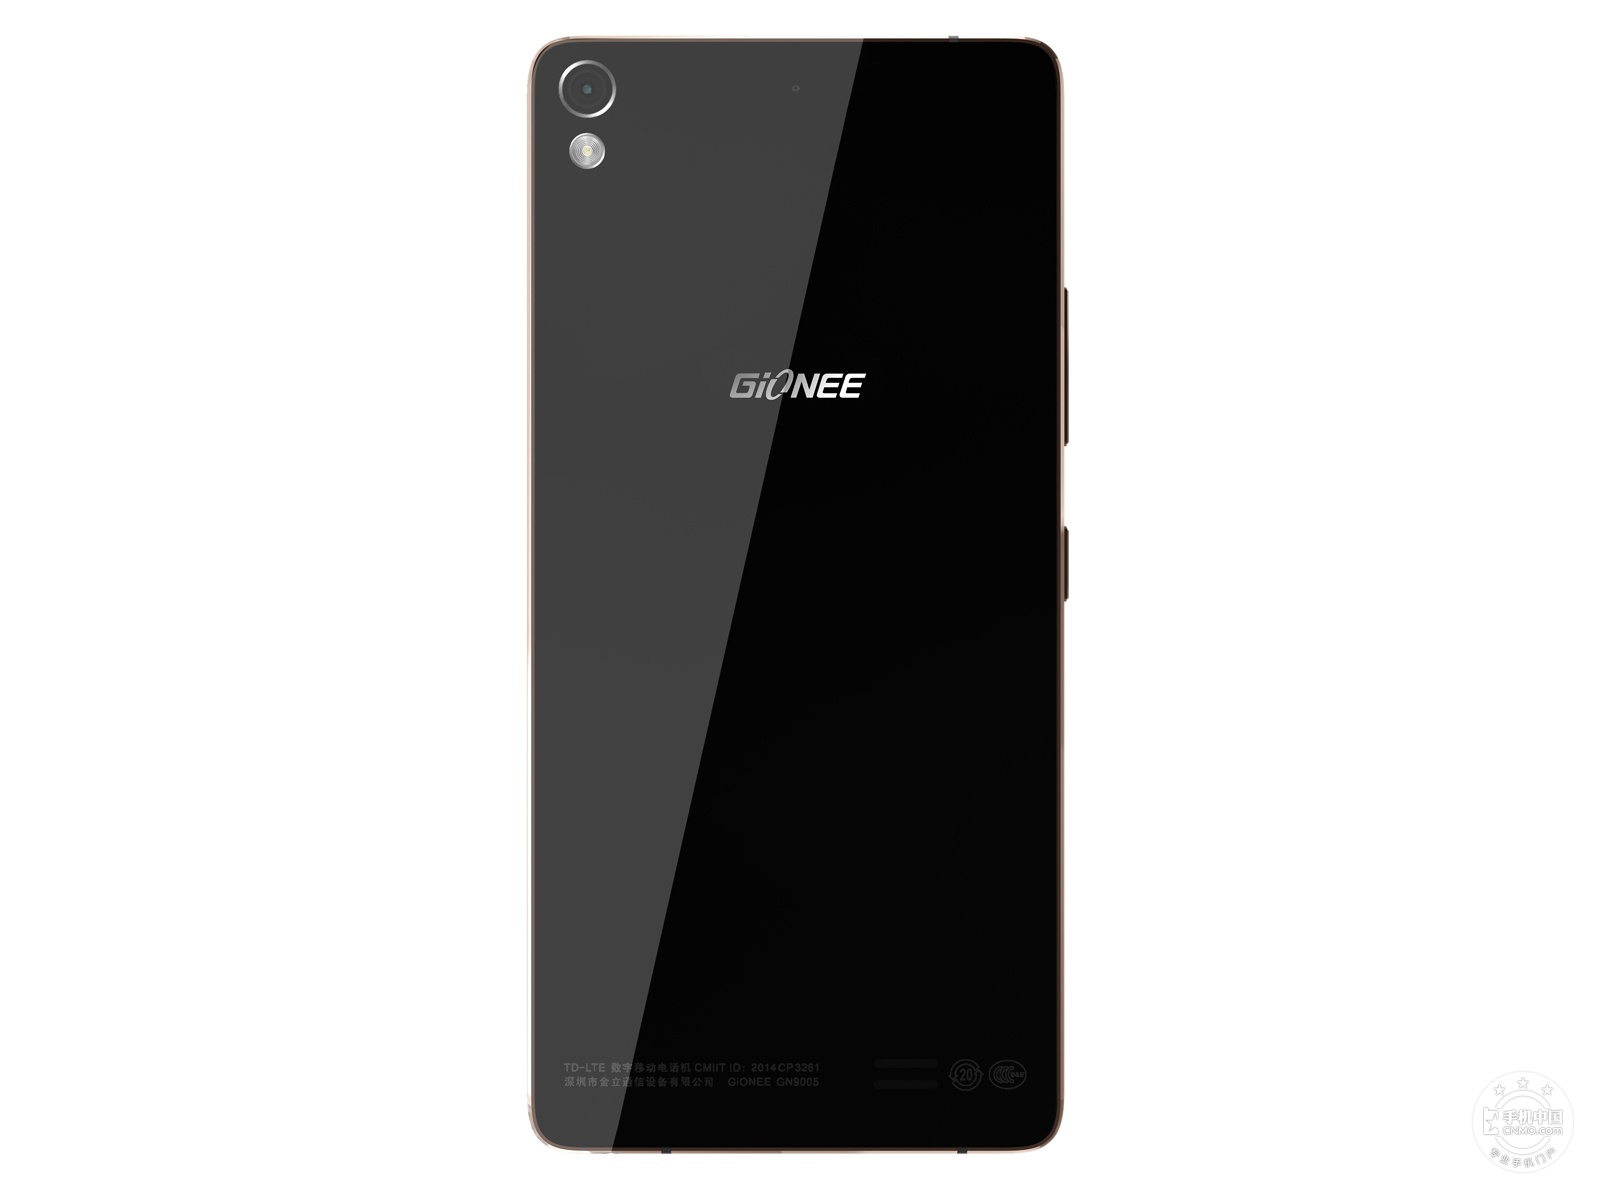 Gionee-Elife-S5.1-11